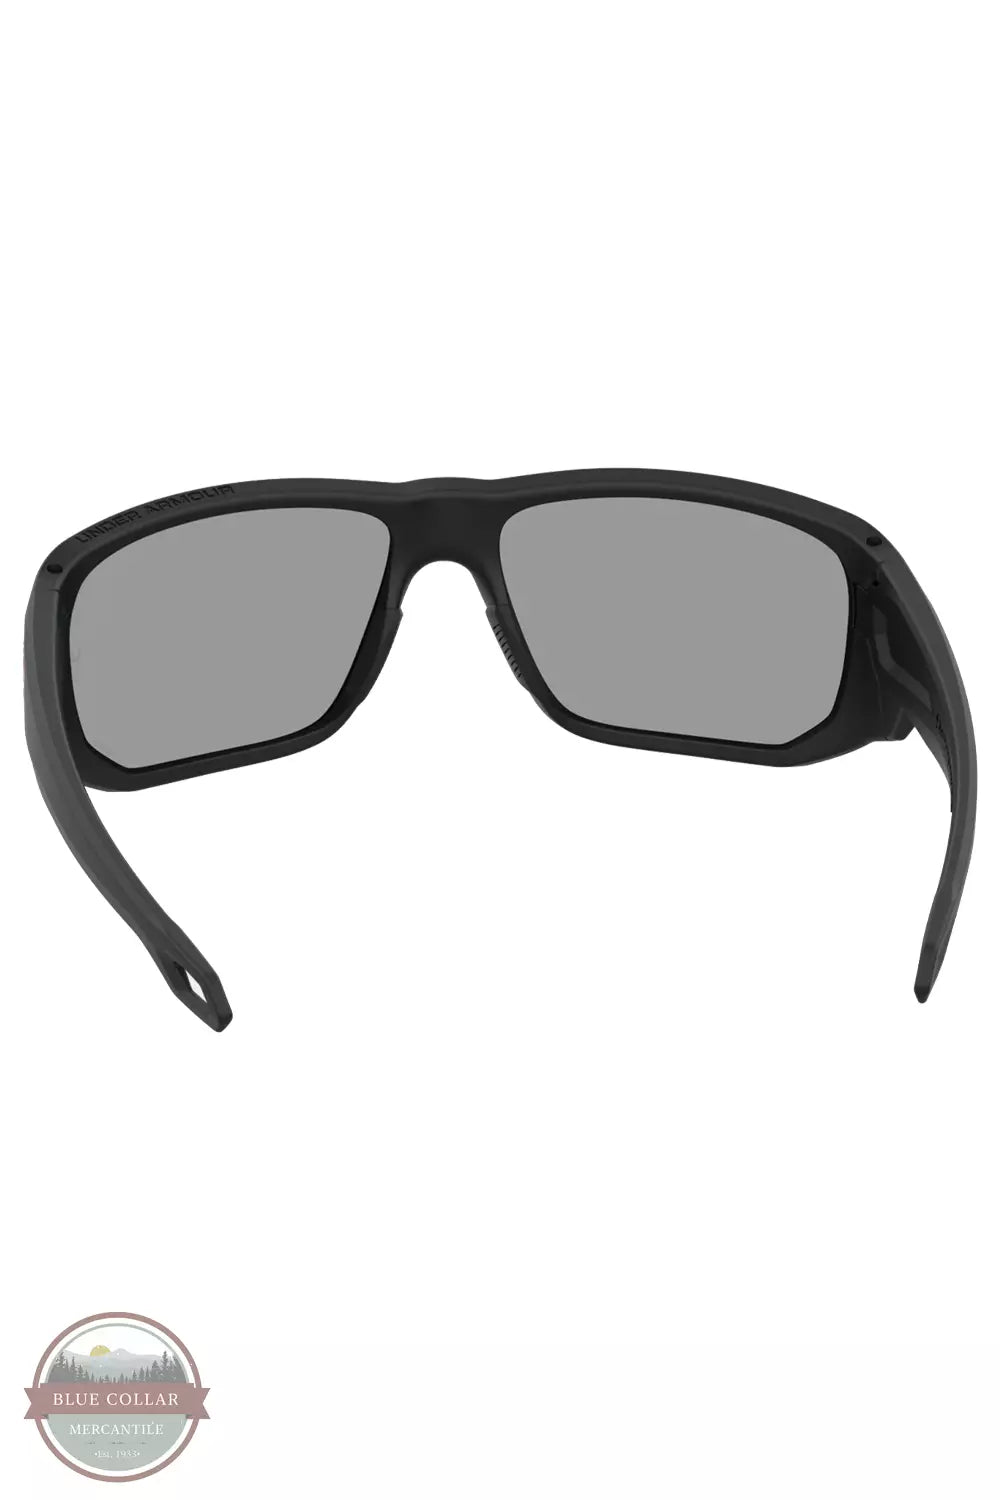 Under Armour 1378142-883 Freedom Attack 2 ANSI Mirror Sunglasses in Matte Black / Blue Mirror Inside View